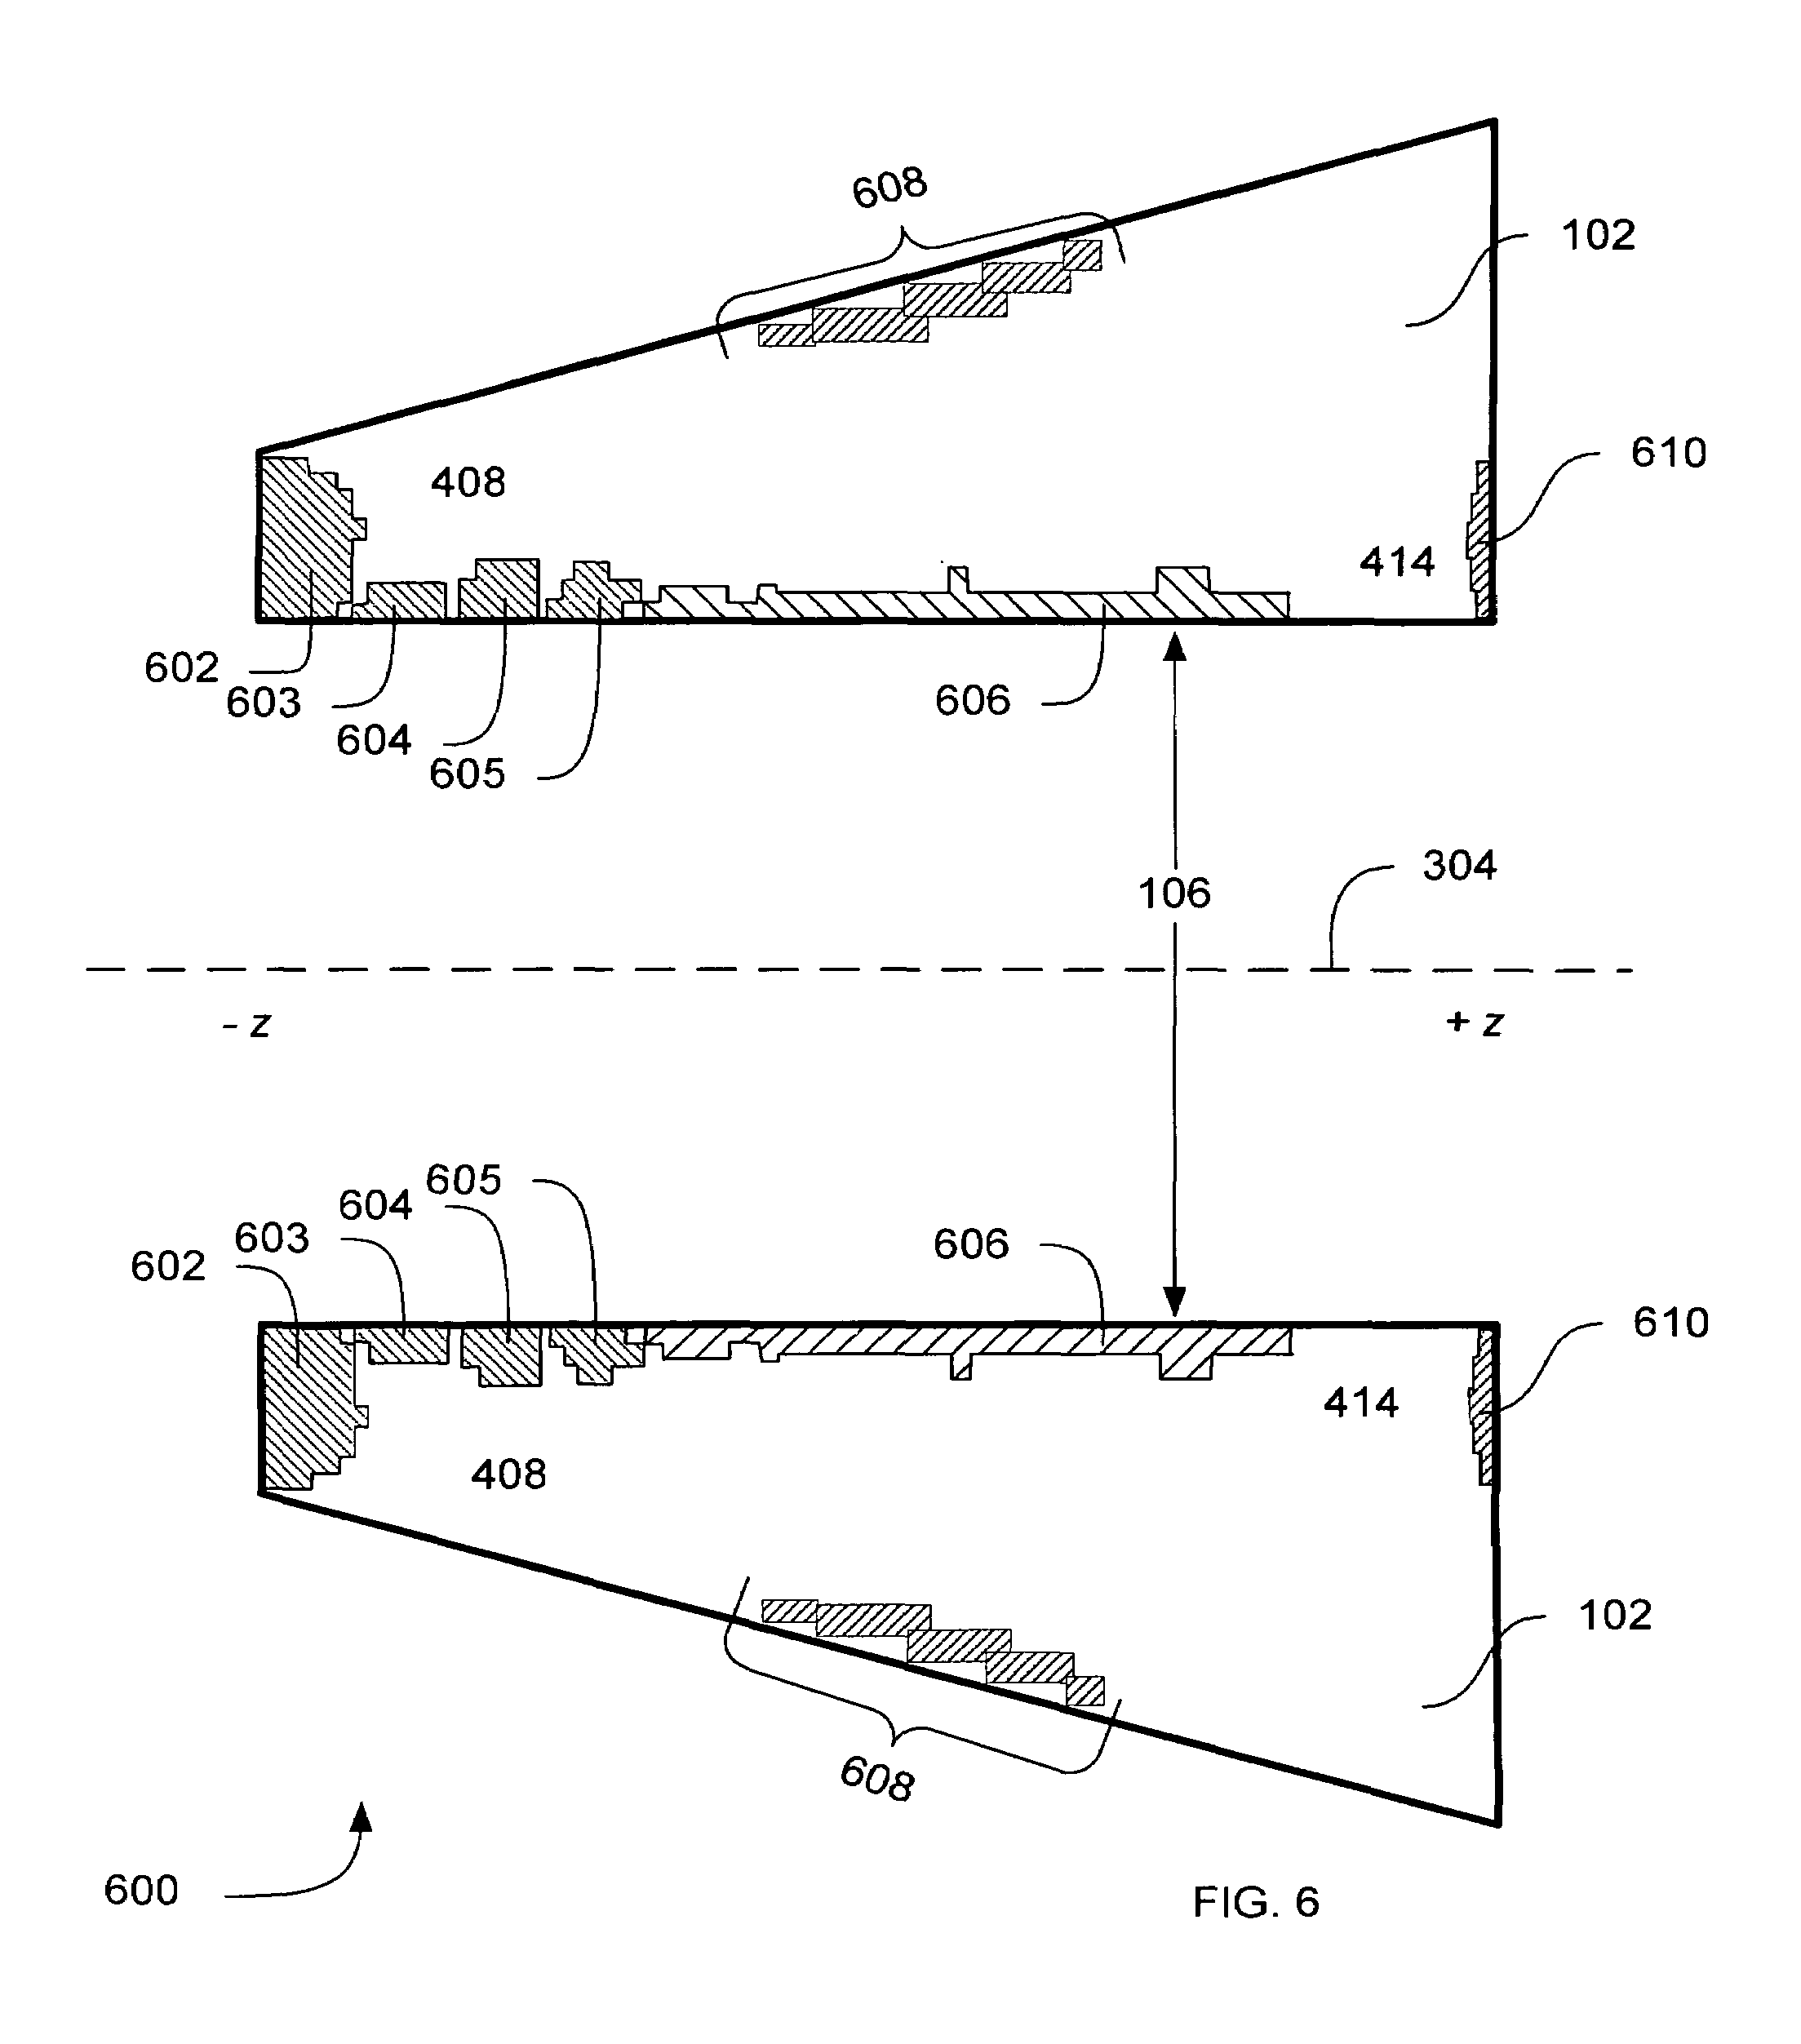 Systems, methods and apparatus of a magnetic resonance imaging magnet to produce an asymmetrical stray field